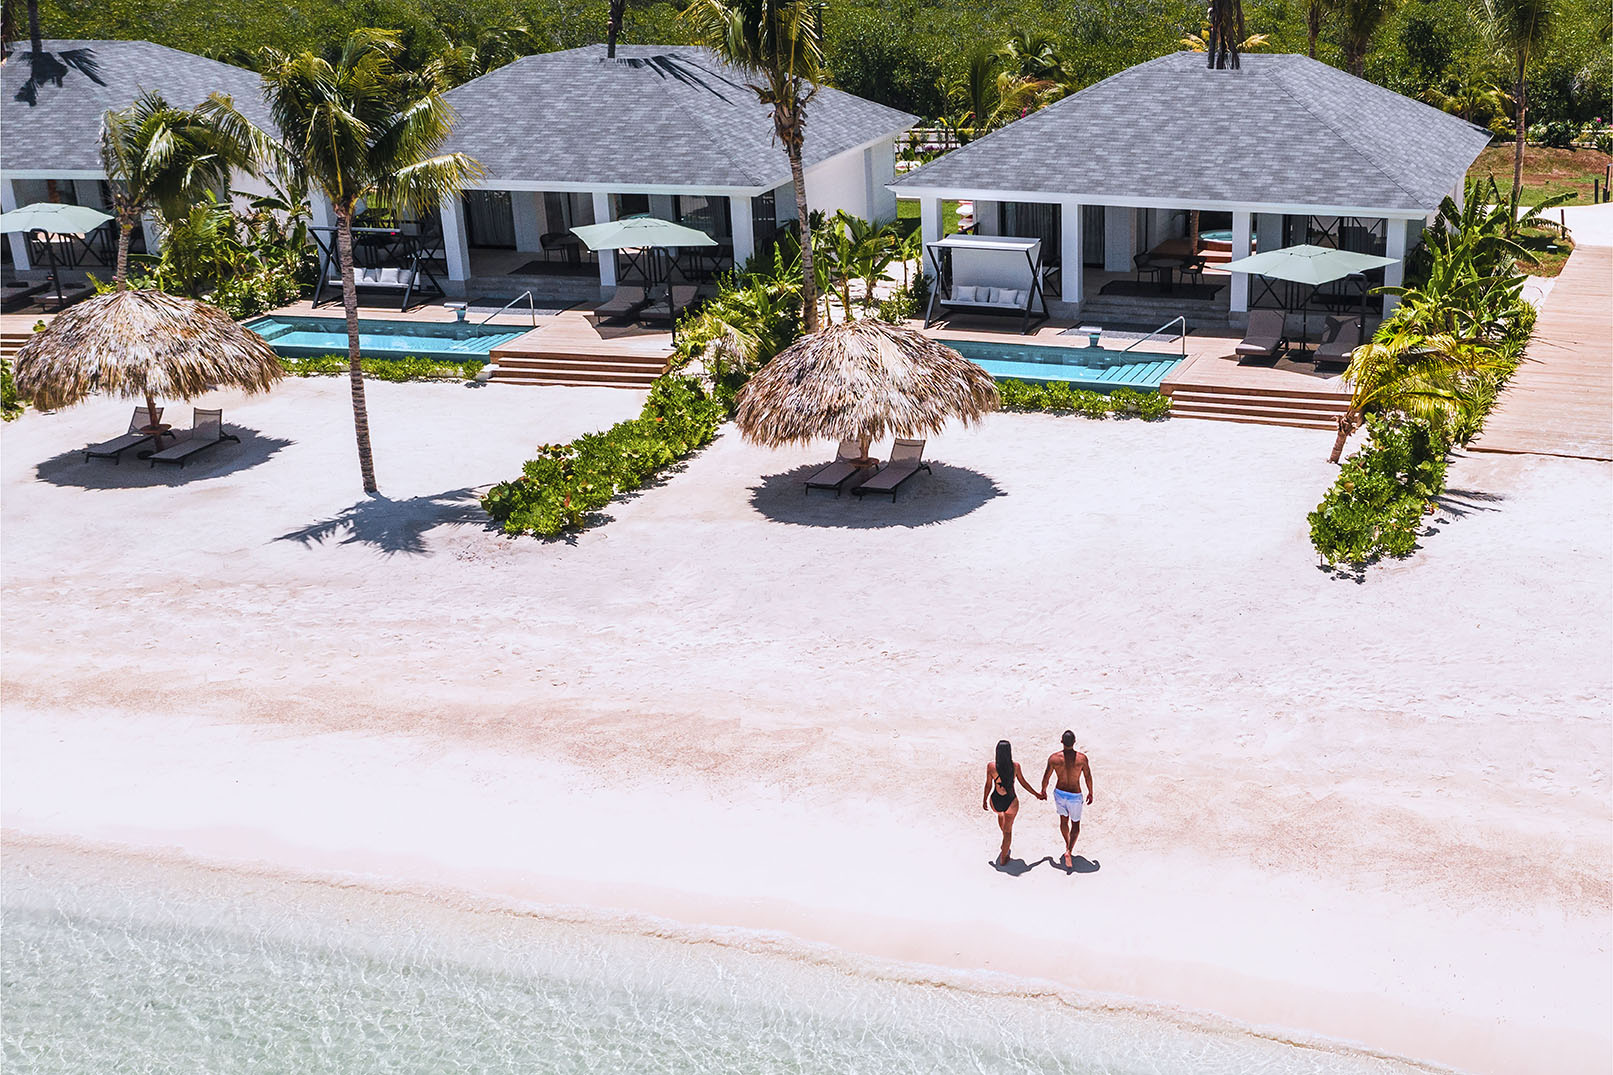 What Makes Montego Bay The Best Place For a Romantic Getaway in The Caribbean